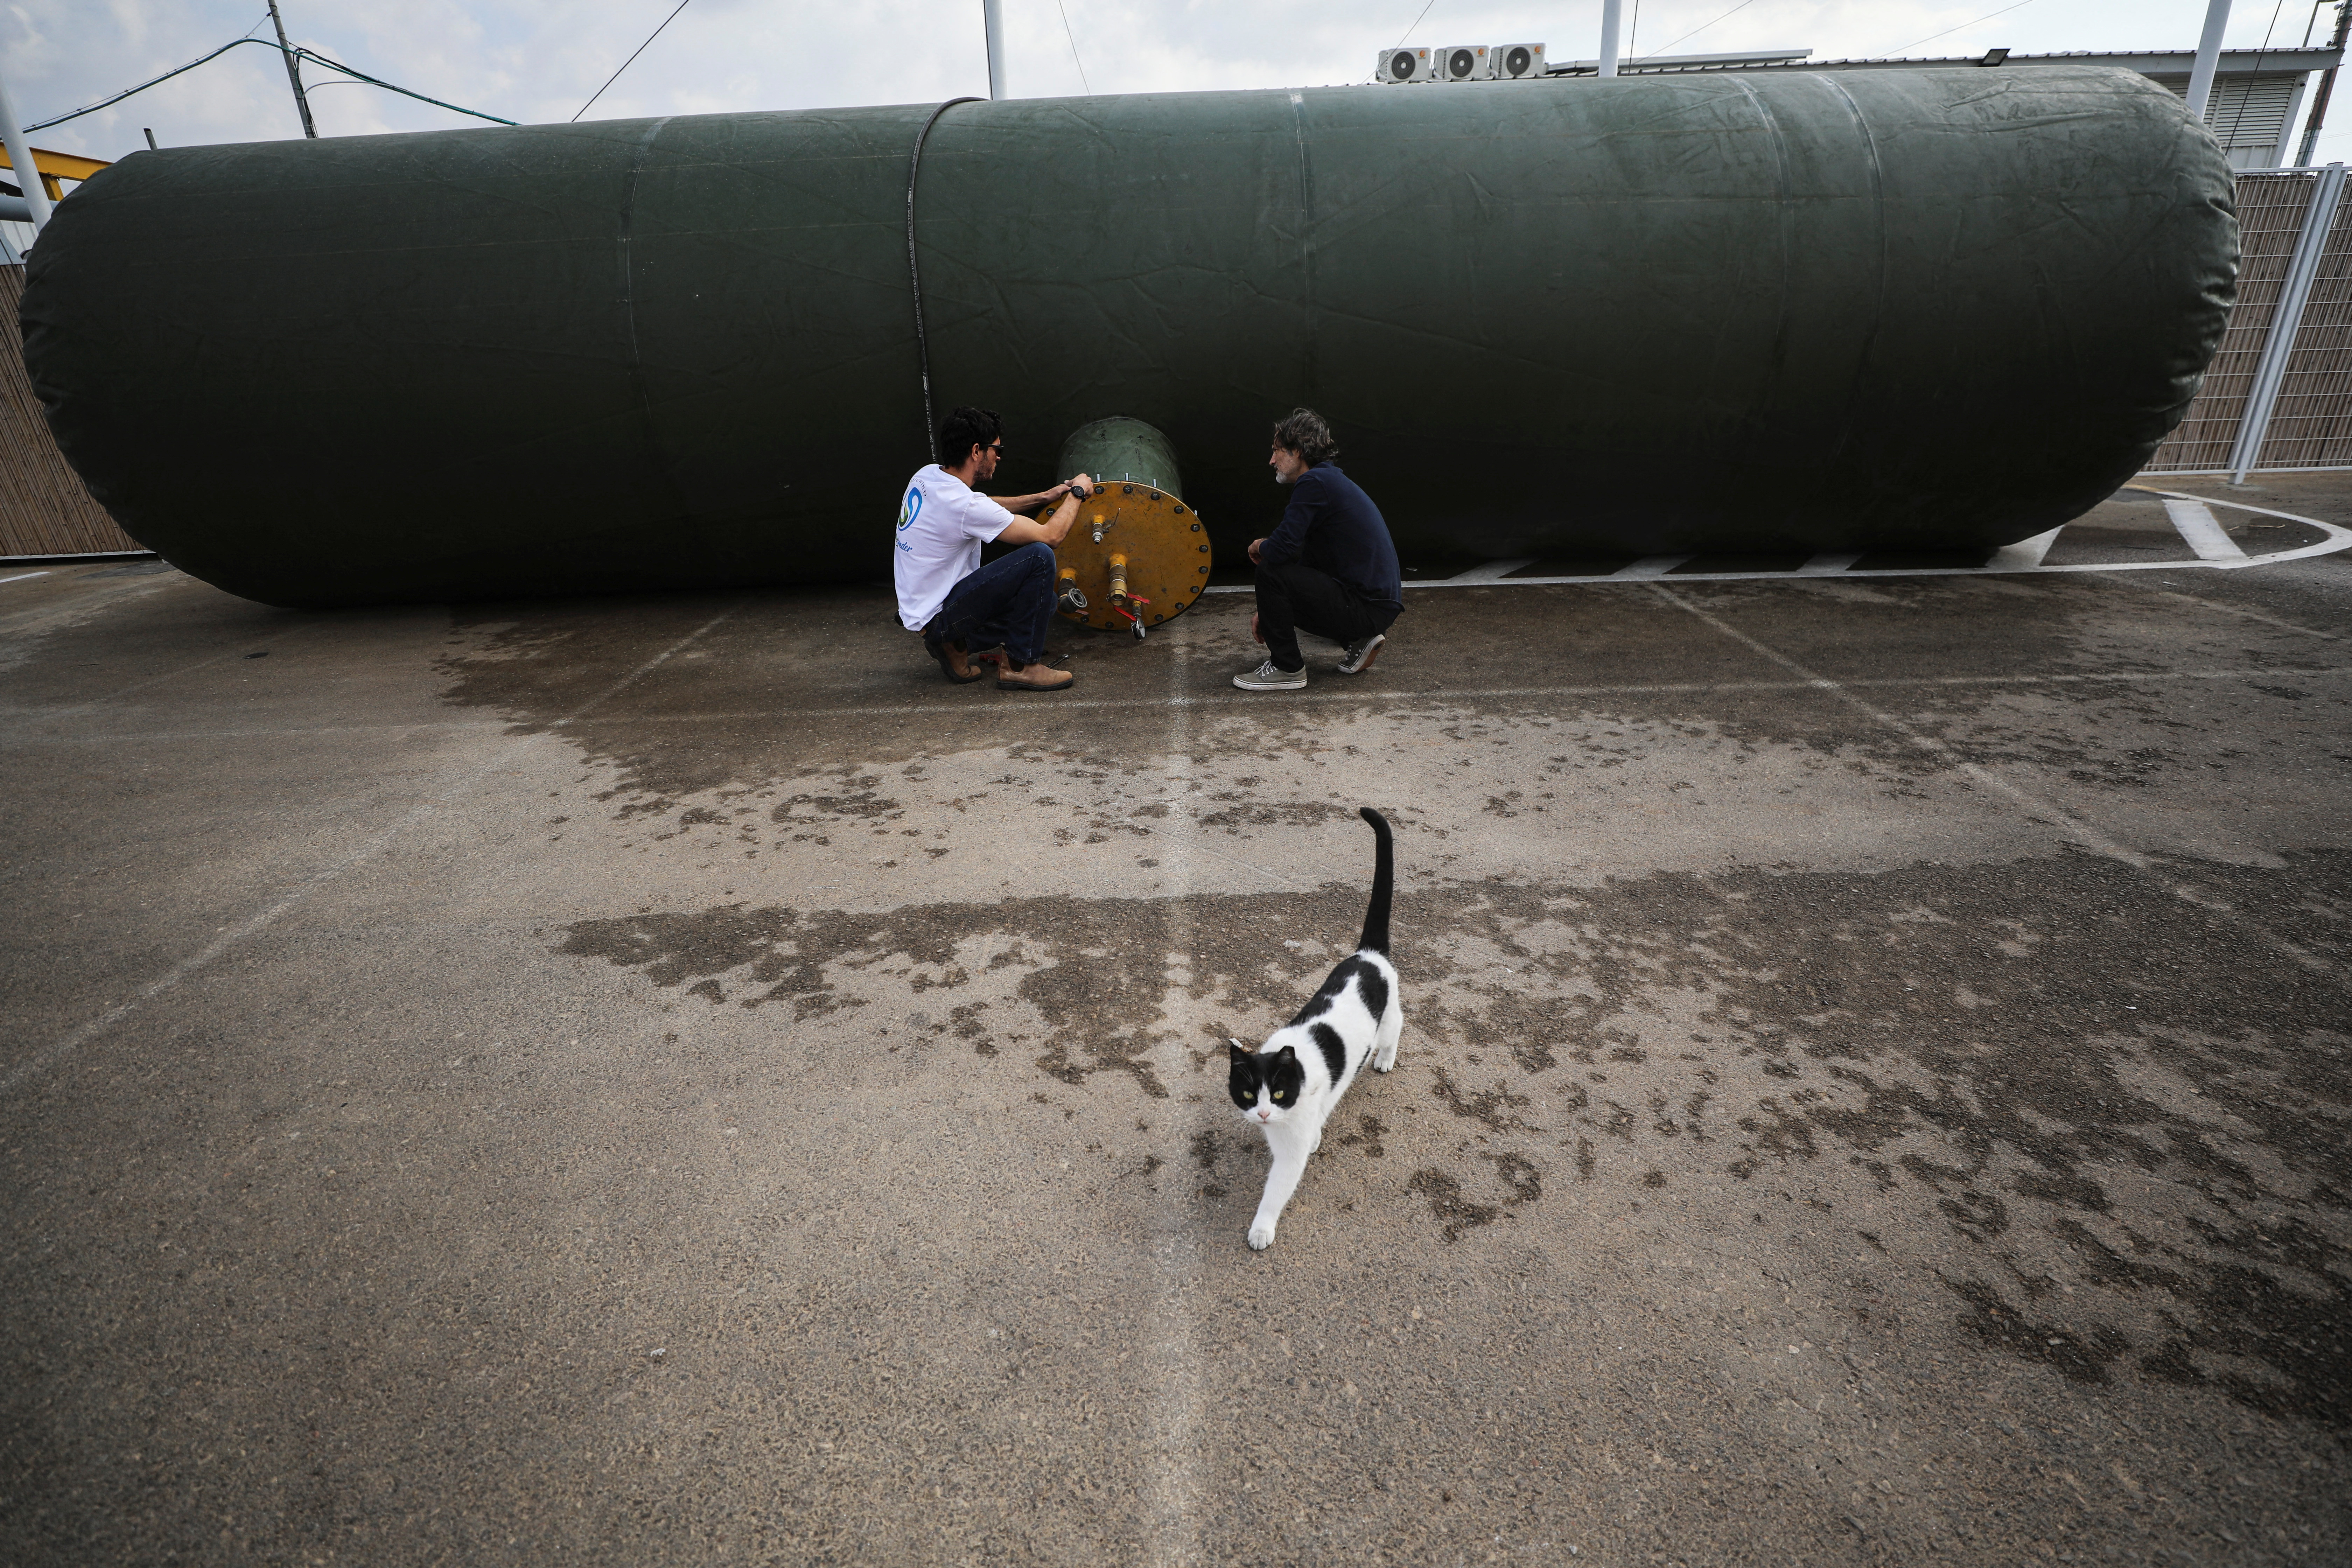 Employees kneel by the lining of an air storage tank at Augwind's headquarters in Kibbutz Yakum, Israel